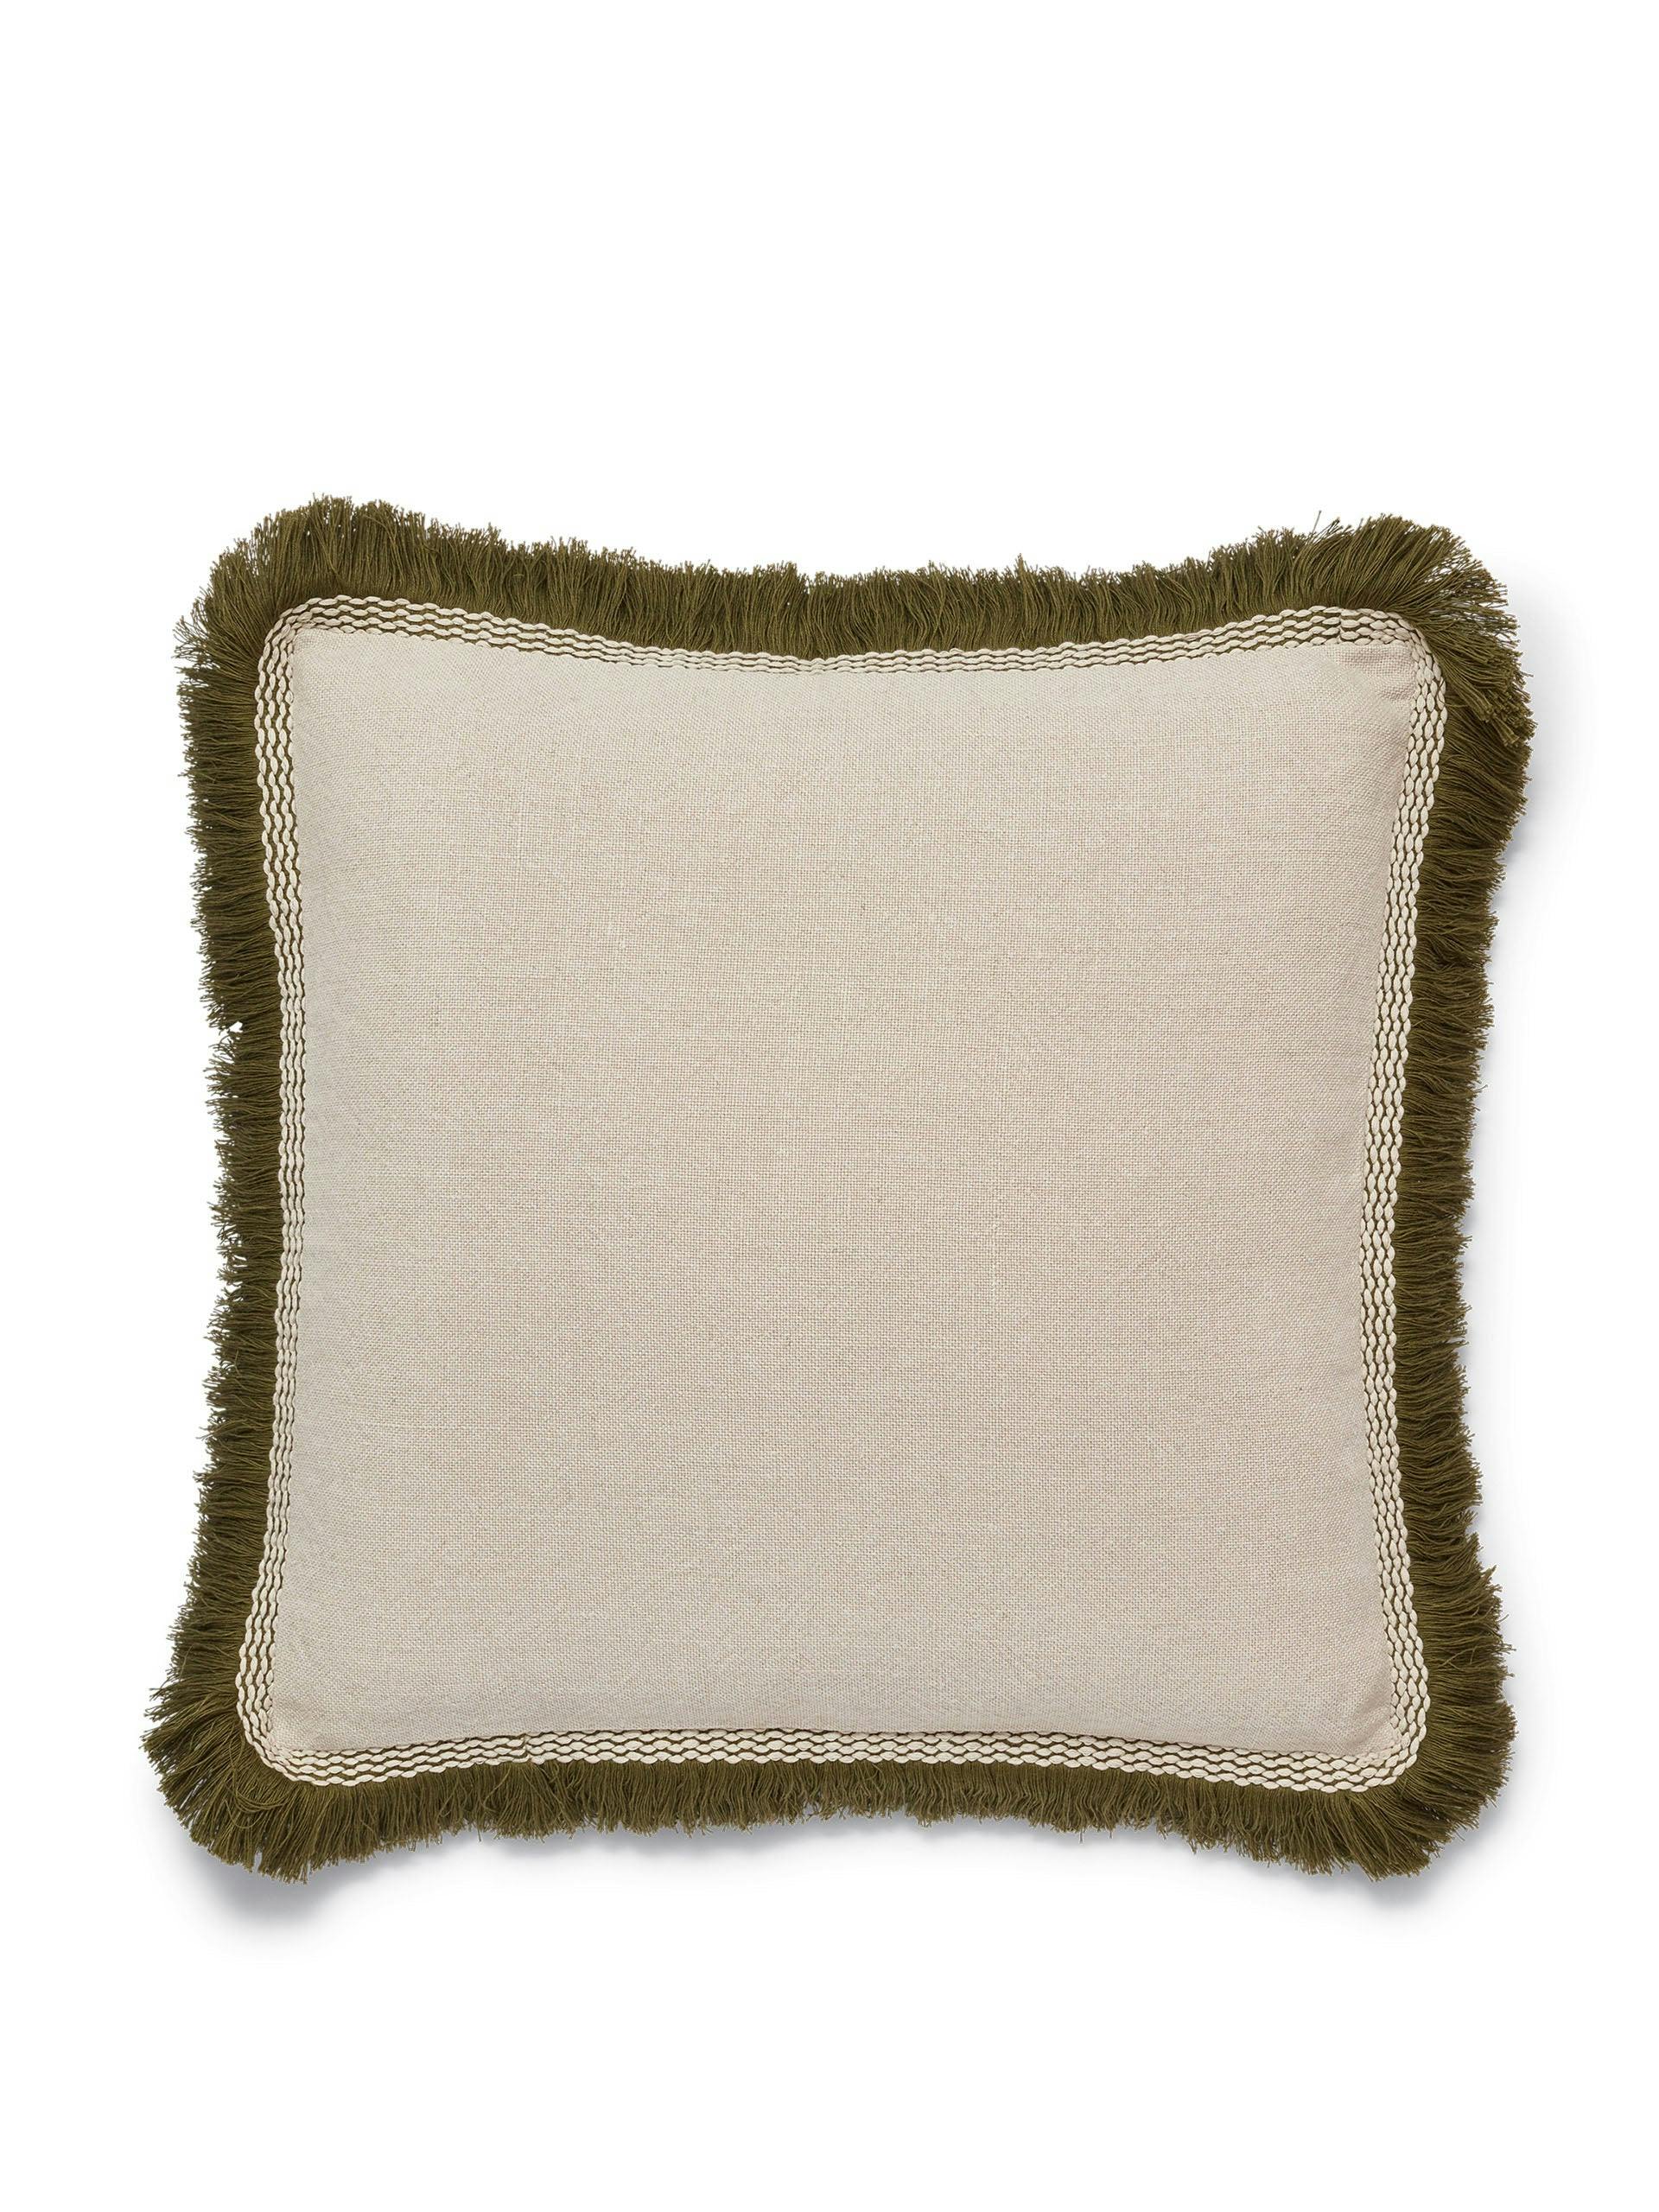 Elspeth cushion cover with green fringing